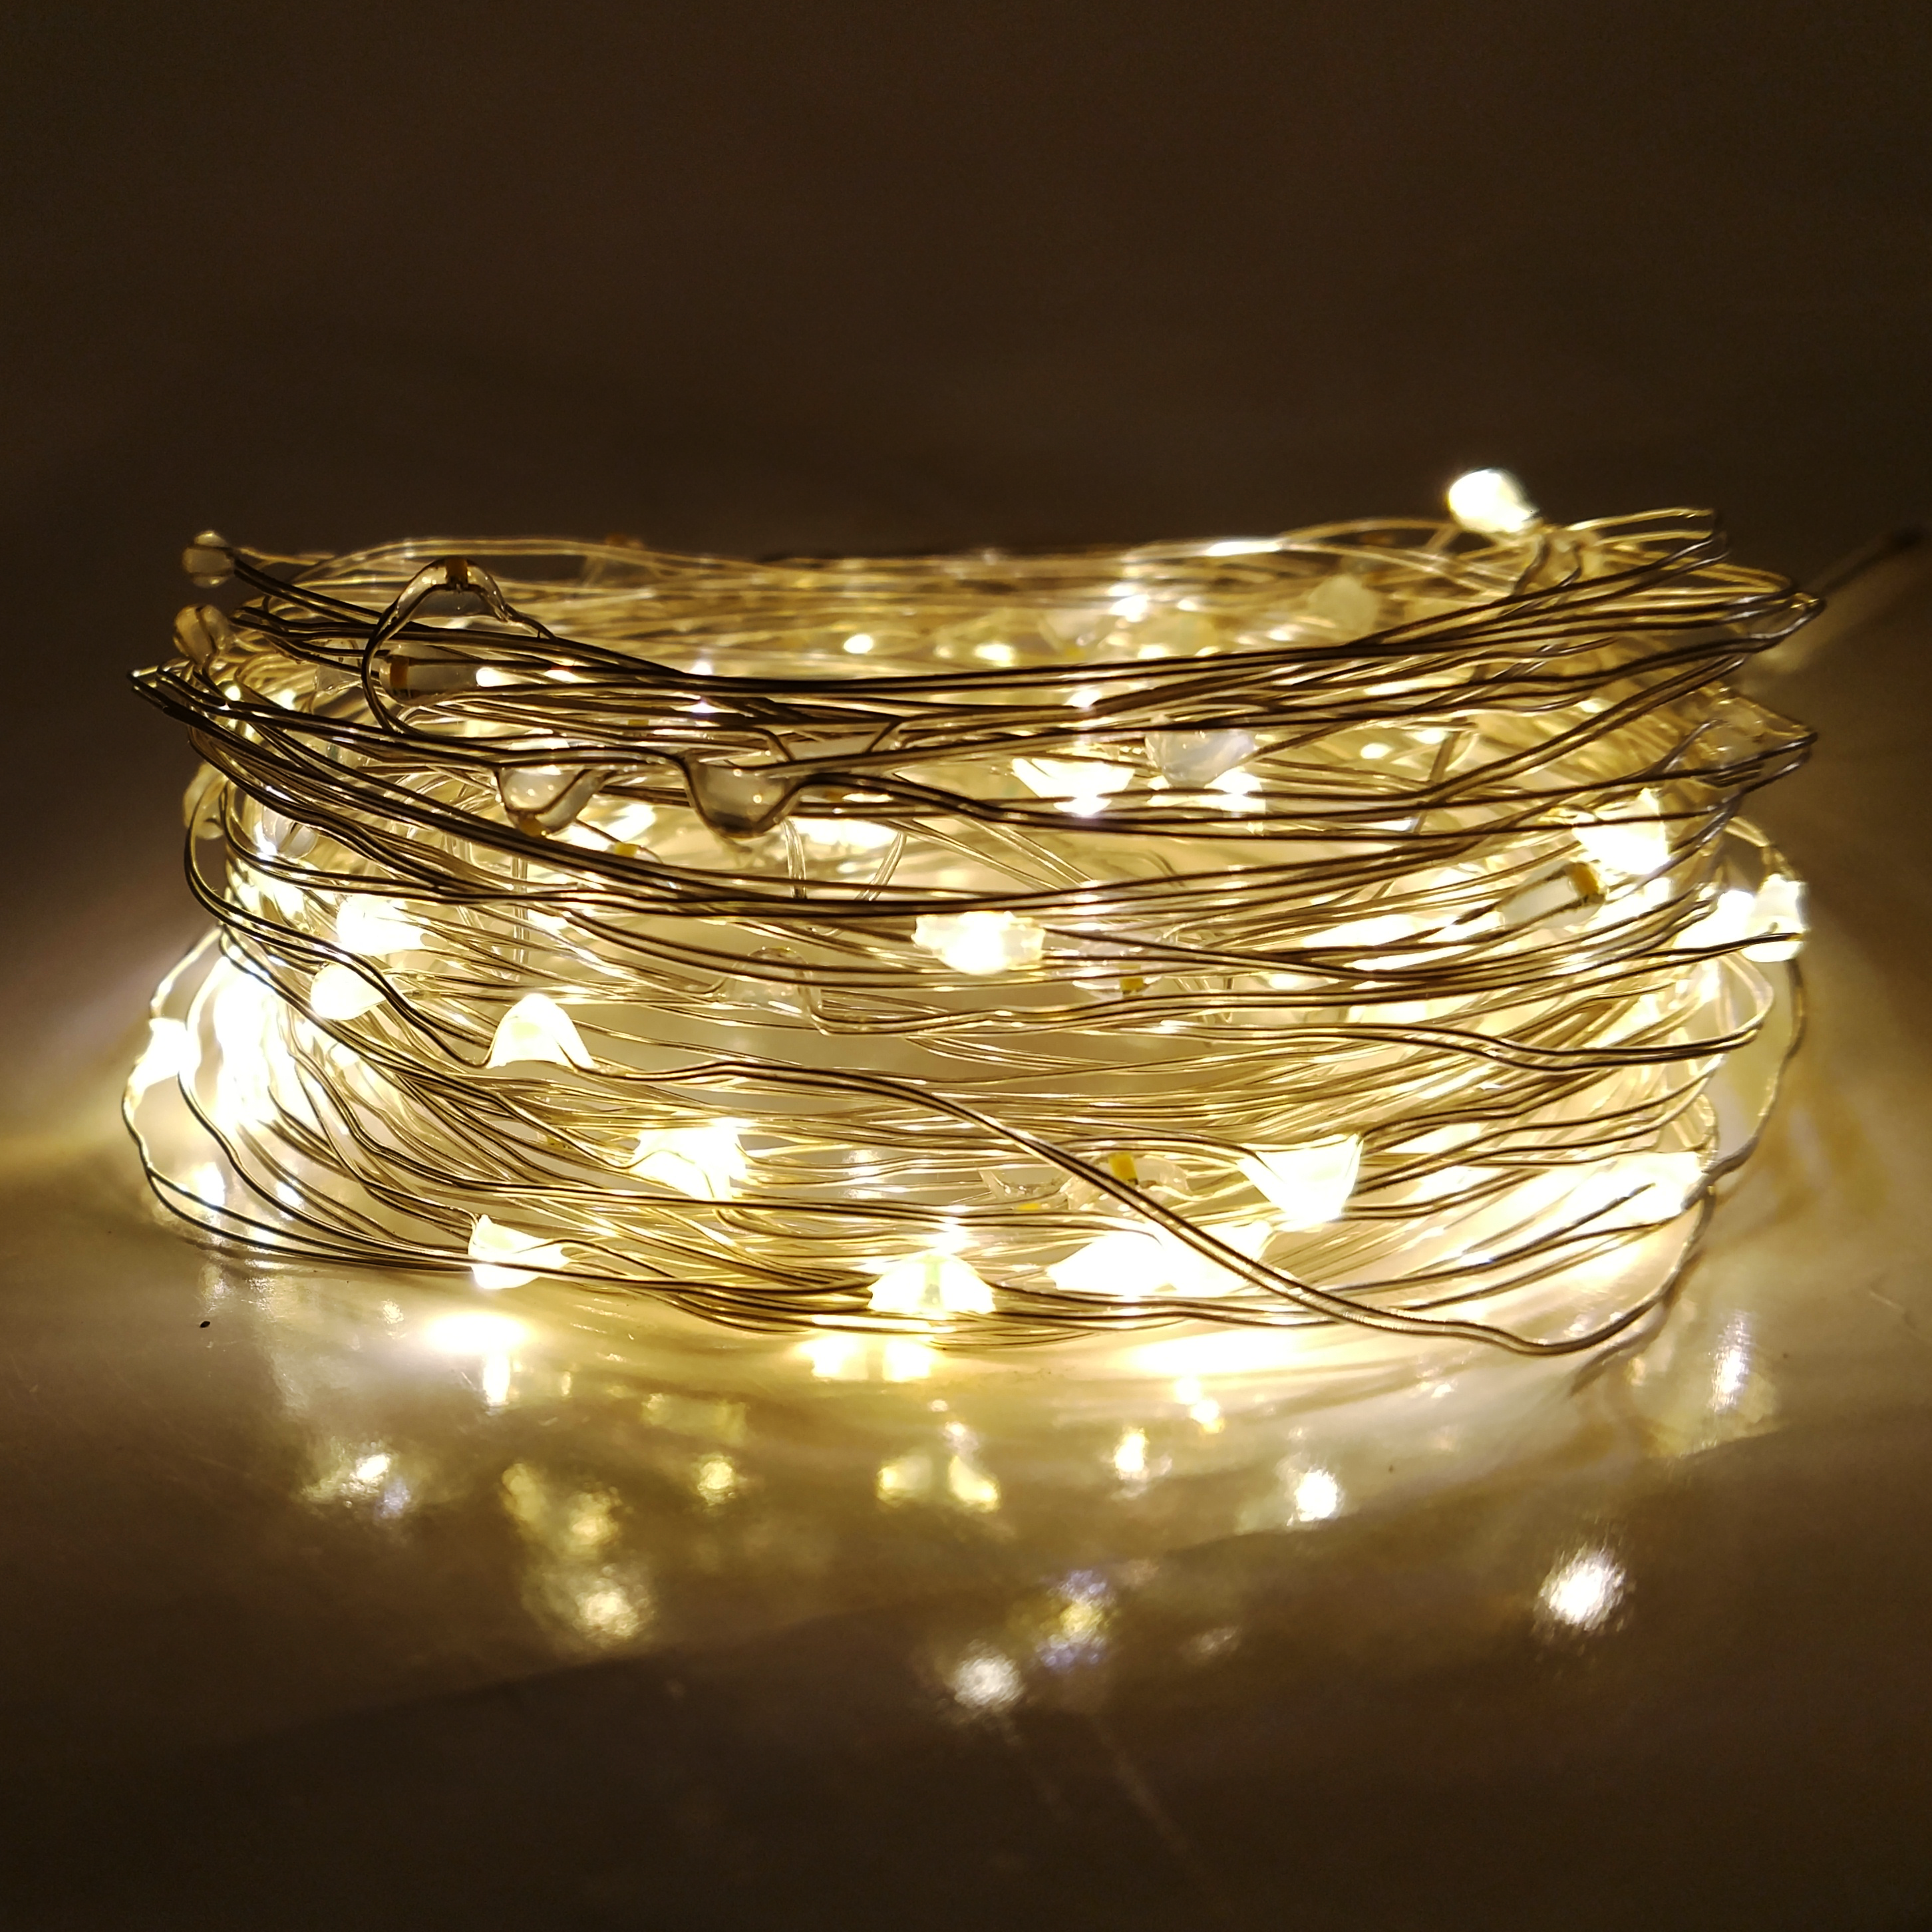 12 Pack Led Fairy Lights Battery Operated String Waterproof Silver Wire 7 大特価放出！